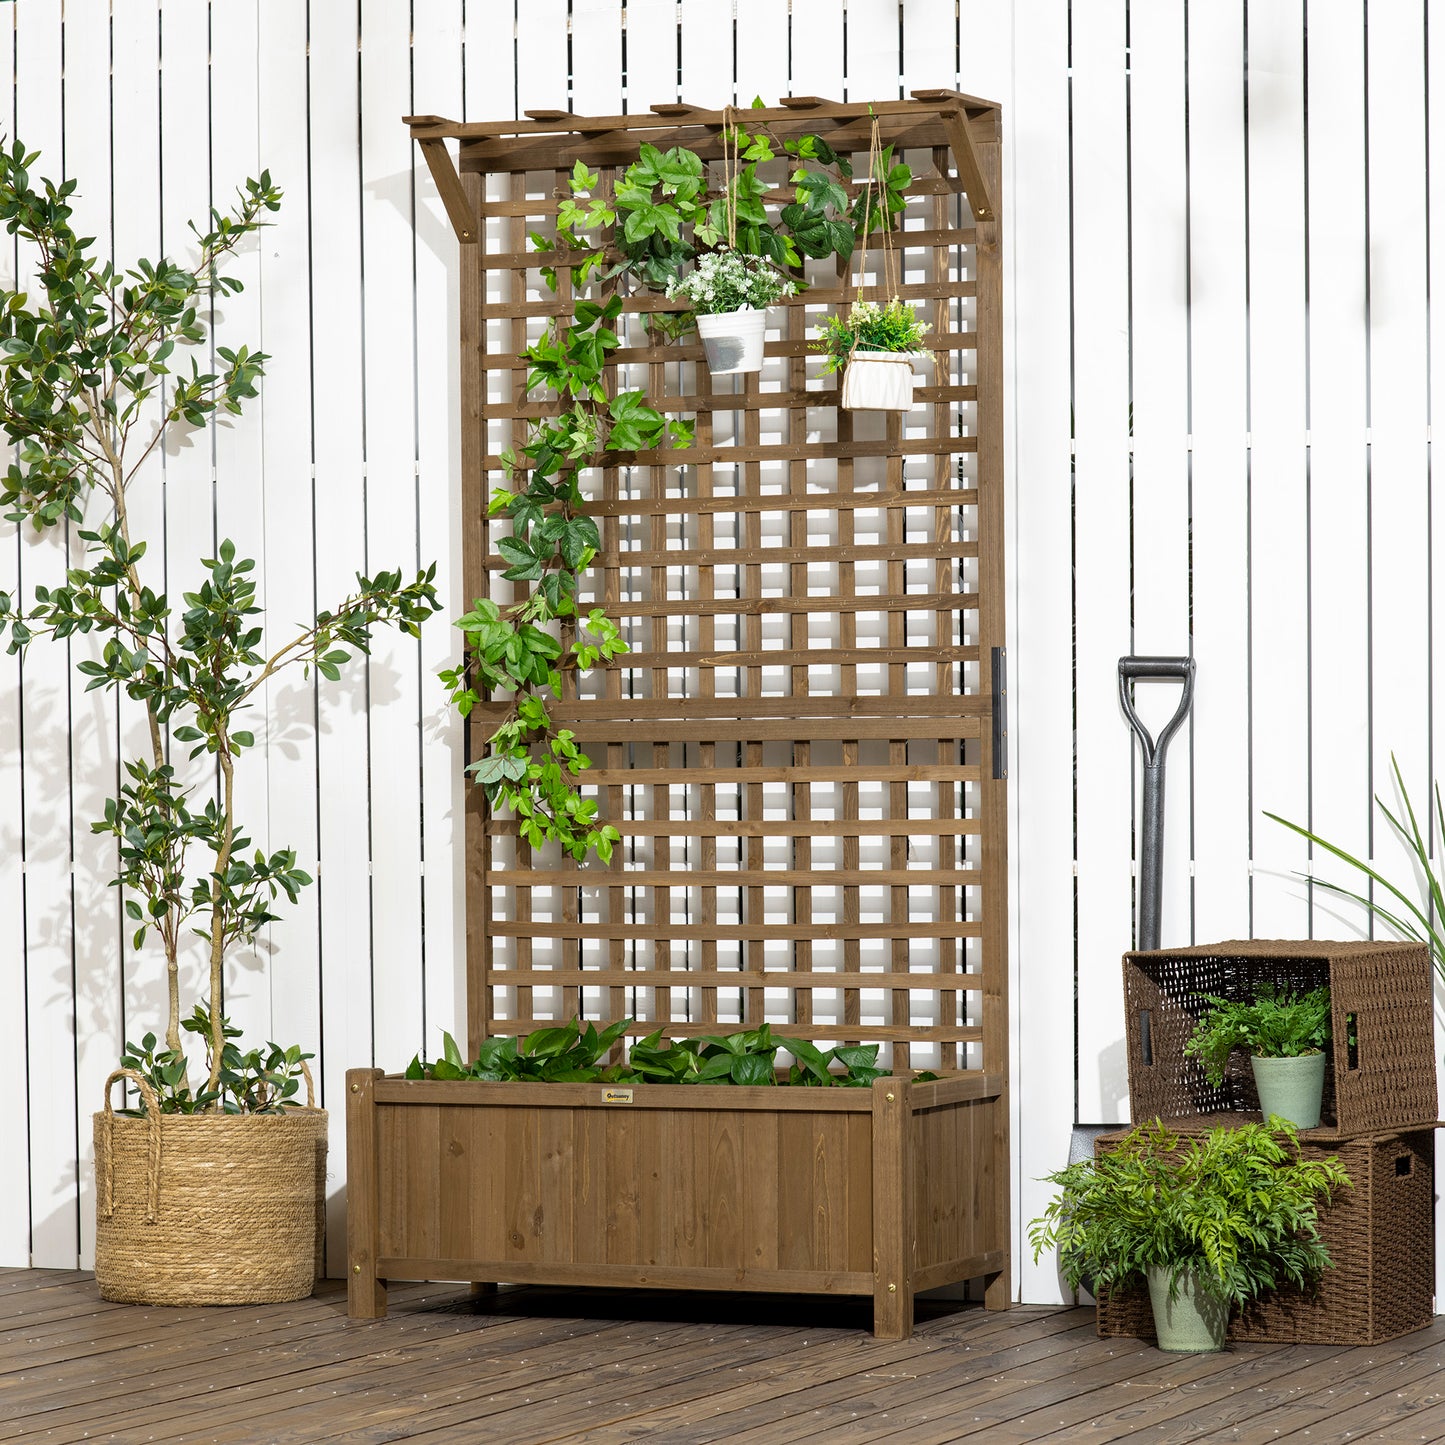 Outsunny Wood Planter with Trellis for Vine Climbing, Raised Garden Bed, Privacy Screen for Backyard, Patio, Deck, Coffee